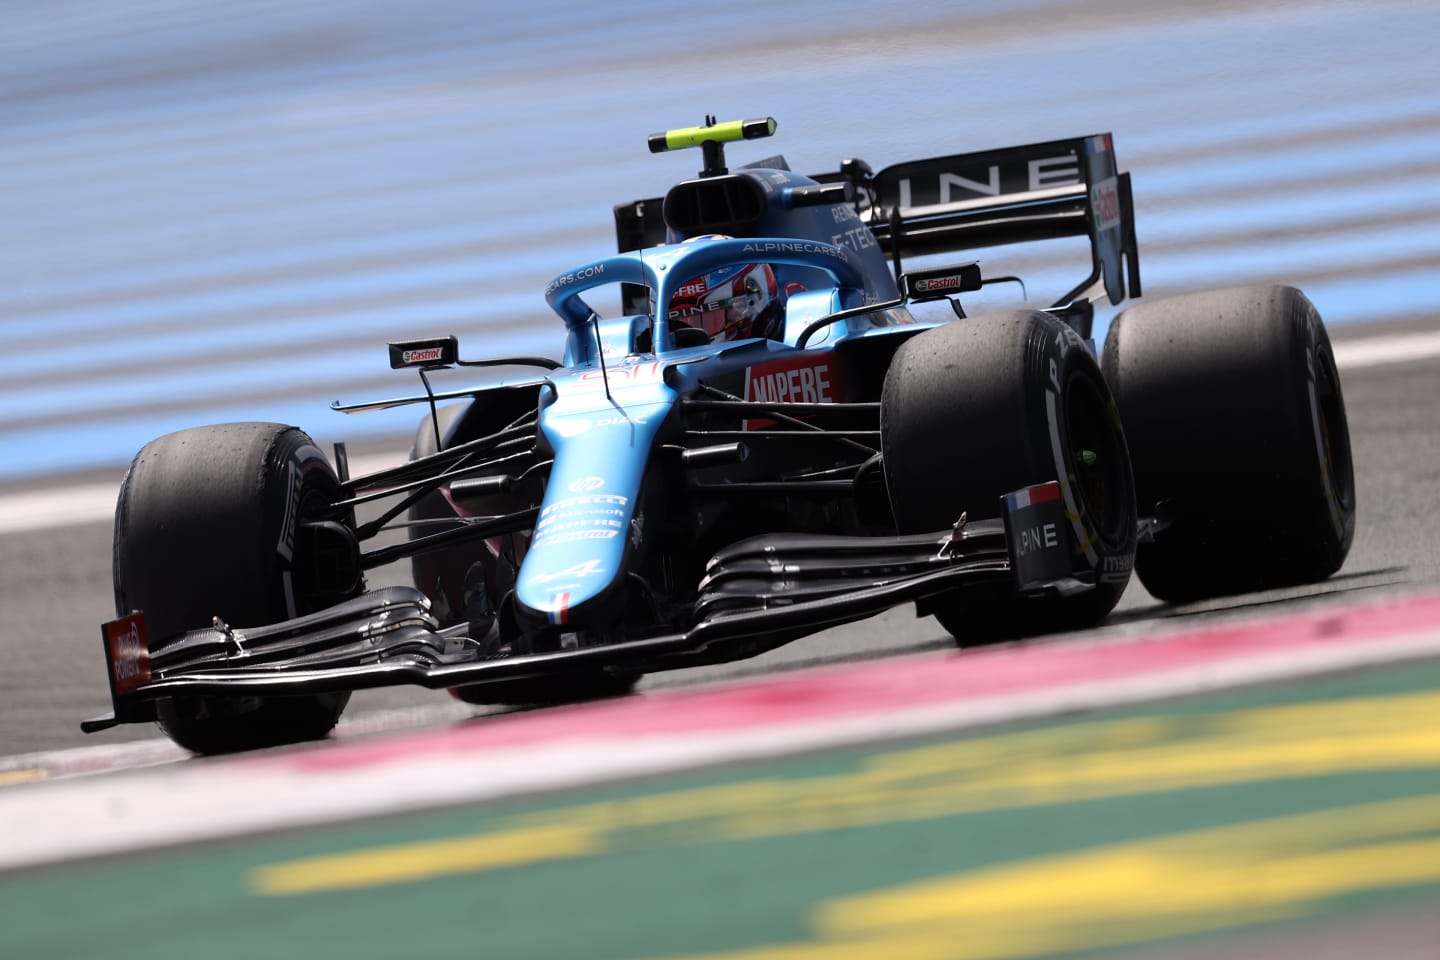 LE CASTELLET, FRANCE - JUNE 18: Esteban Ocon of France driving the (31) Alpine A521 Renault on track during practice ahead of the F1 Grand Prix of France at Circuit Paul Ricard on June 18, 2021 in Le Castellet, France. (Photo by Clive Rose/Getty Images)